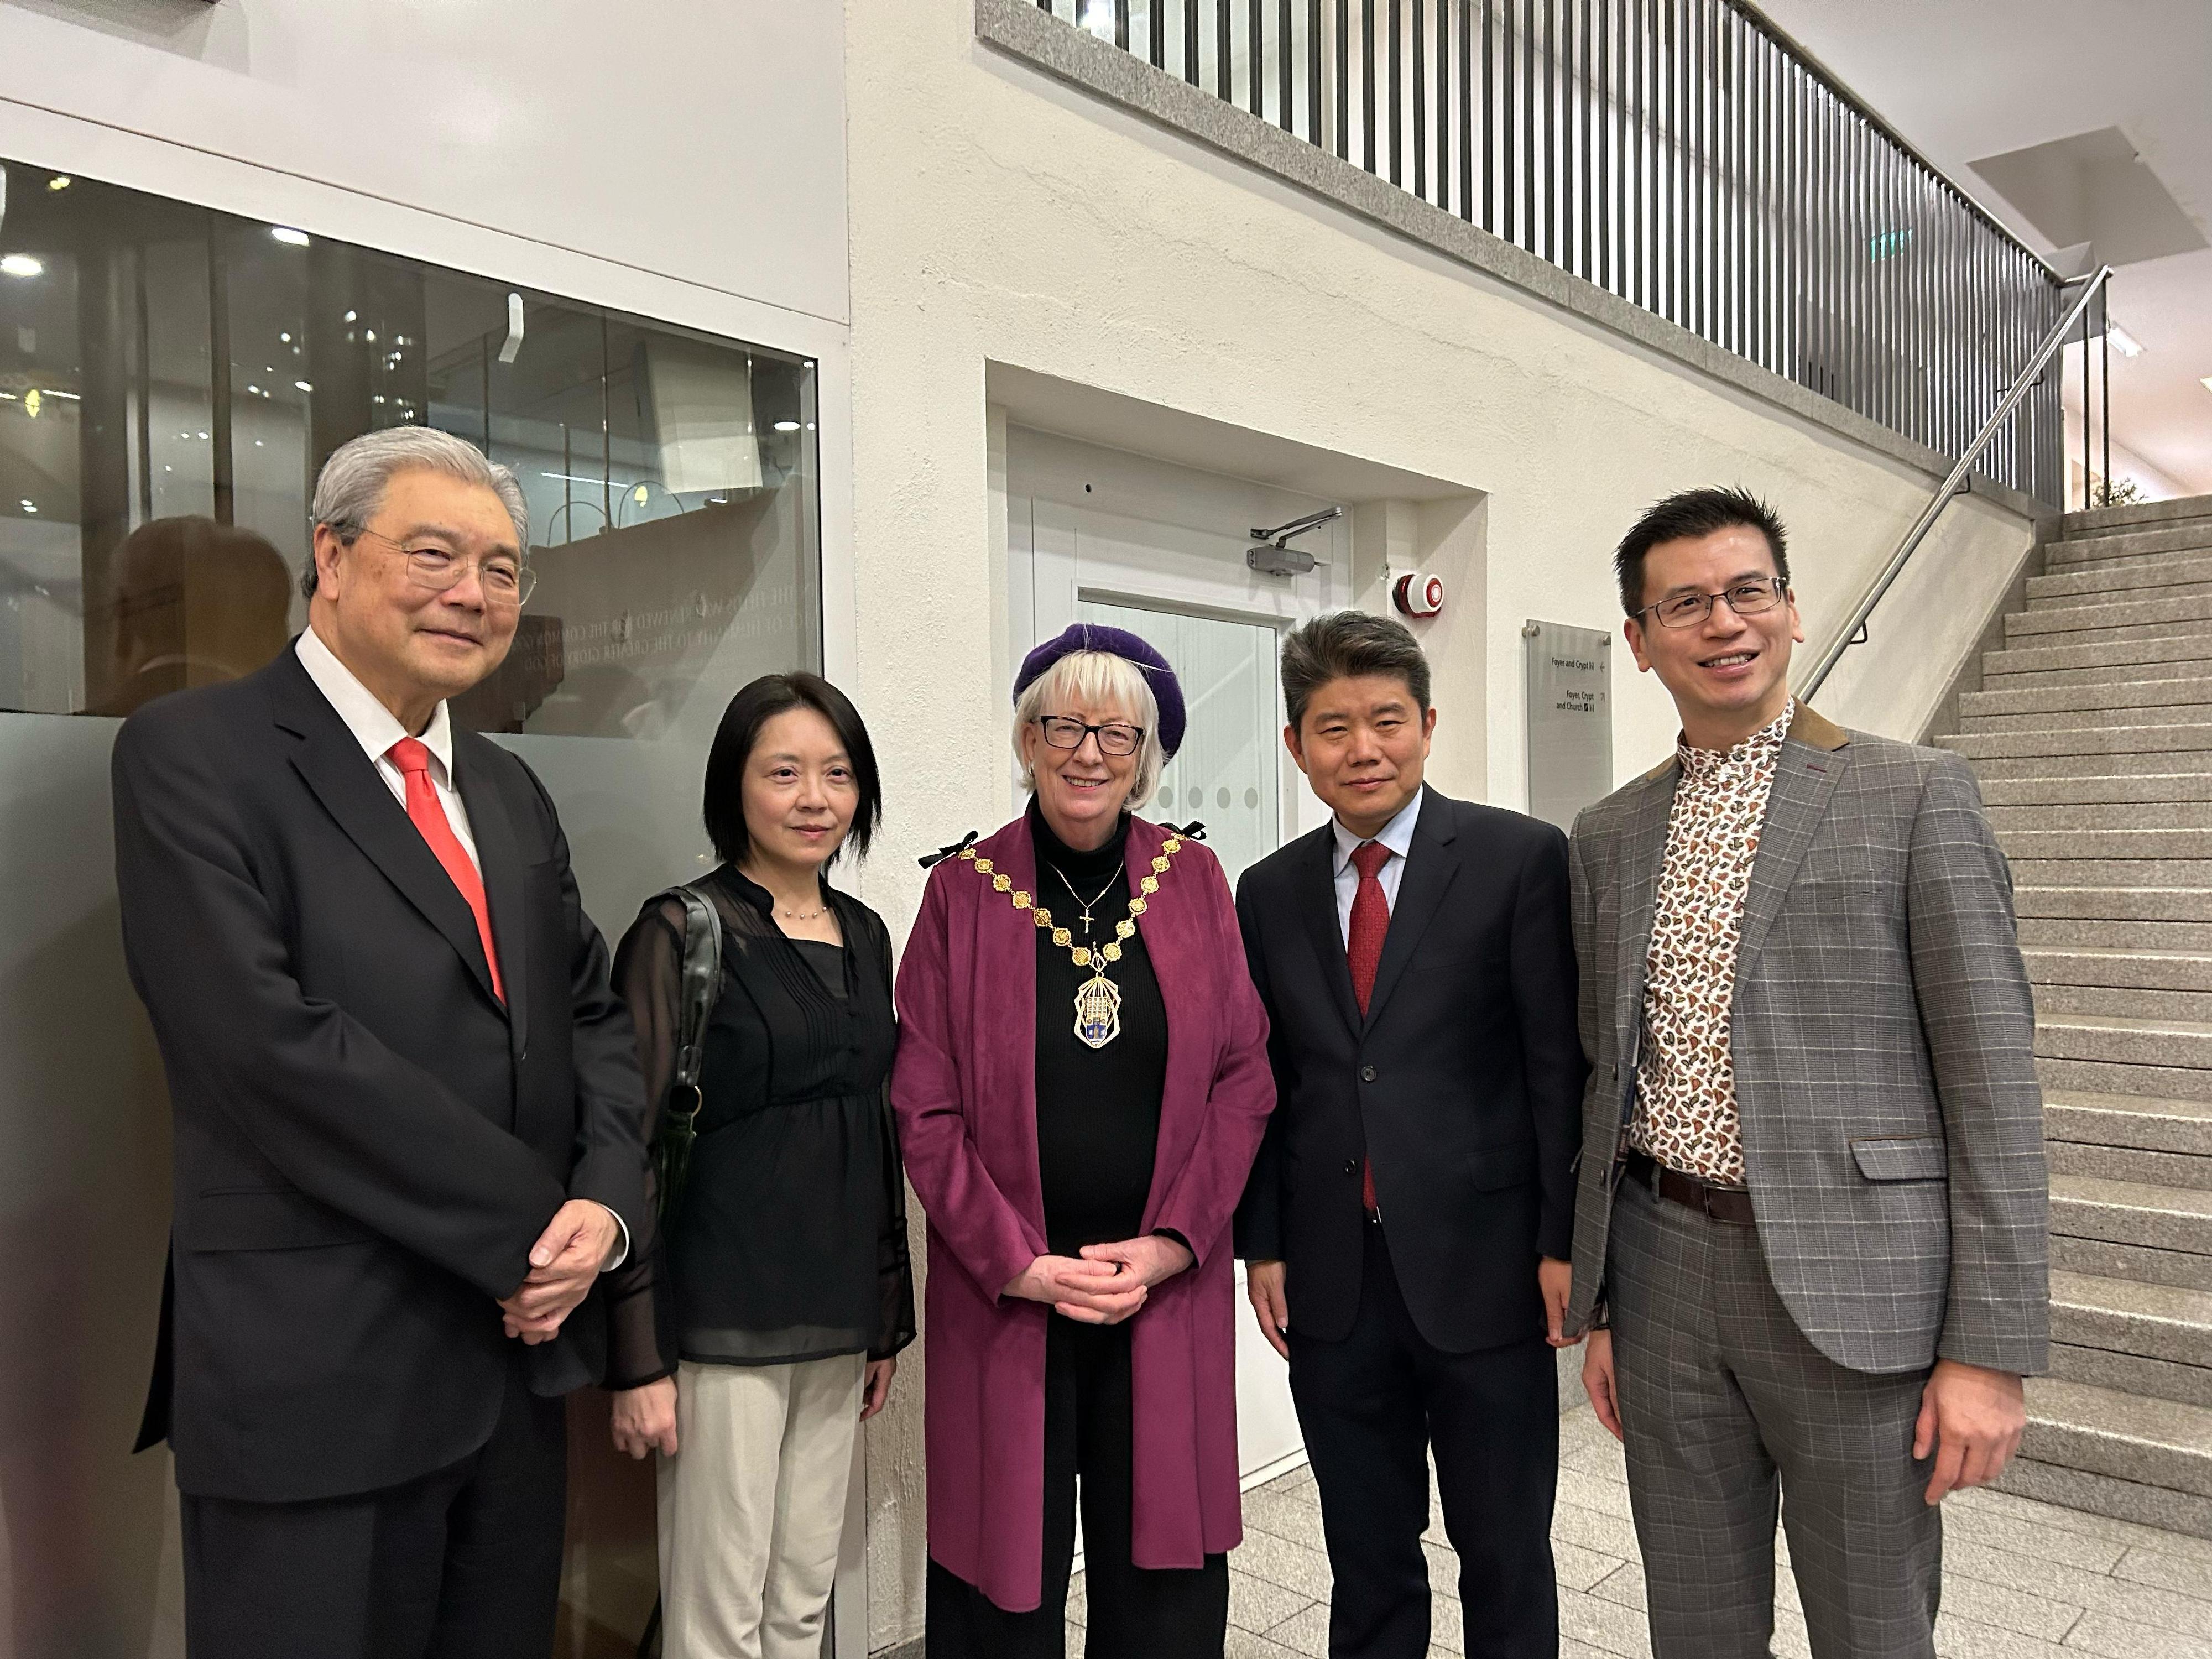 The Hong Kong Economic and Trade Office, London (London ETO) supported the Ming-Ai (London) Institute's Hong Kong pop music concert held at St Martin-in-the-Fields Hall, Trafalgar Square in London, the United Kingdom (UK), on March 7 (London time). Photo shows (from left) the Chairman of the Board of Directors of the Ming-Ai (London) Institute, Professor Jonathan Liu; the Dean of the Ming-Ai (London) Institute, Ms Li Chungwen; the Lord Mayor of Westminster, Ms Patricia McAllister; the Minister Counsellor for Cultural Affairs of the Chinese Embassy in the UK, Mr Li Liyan; and the Director of the London ETO, Mr Gilford Law, at the reception.